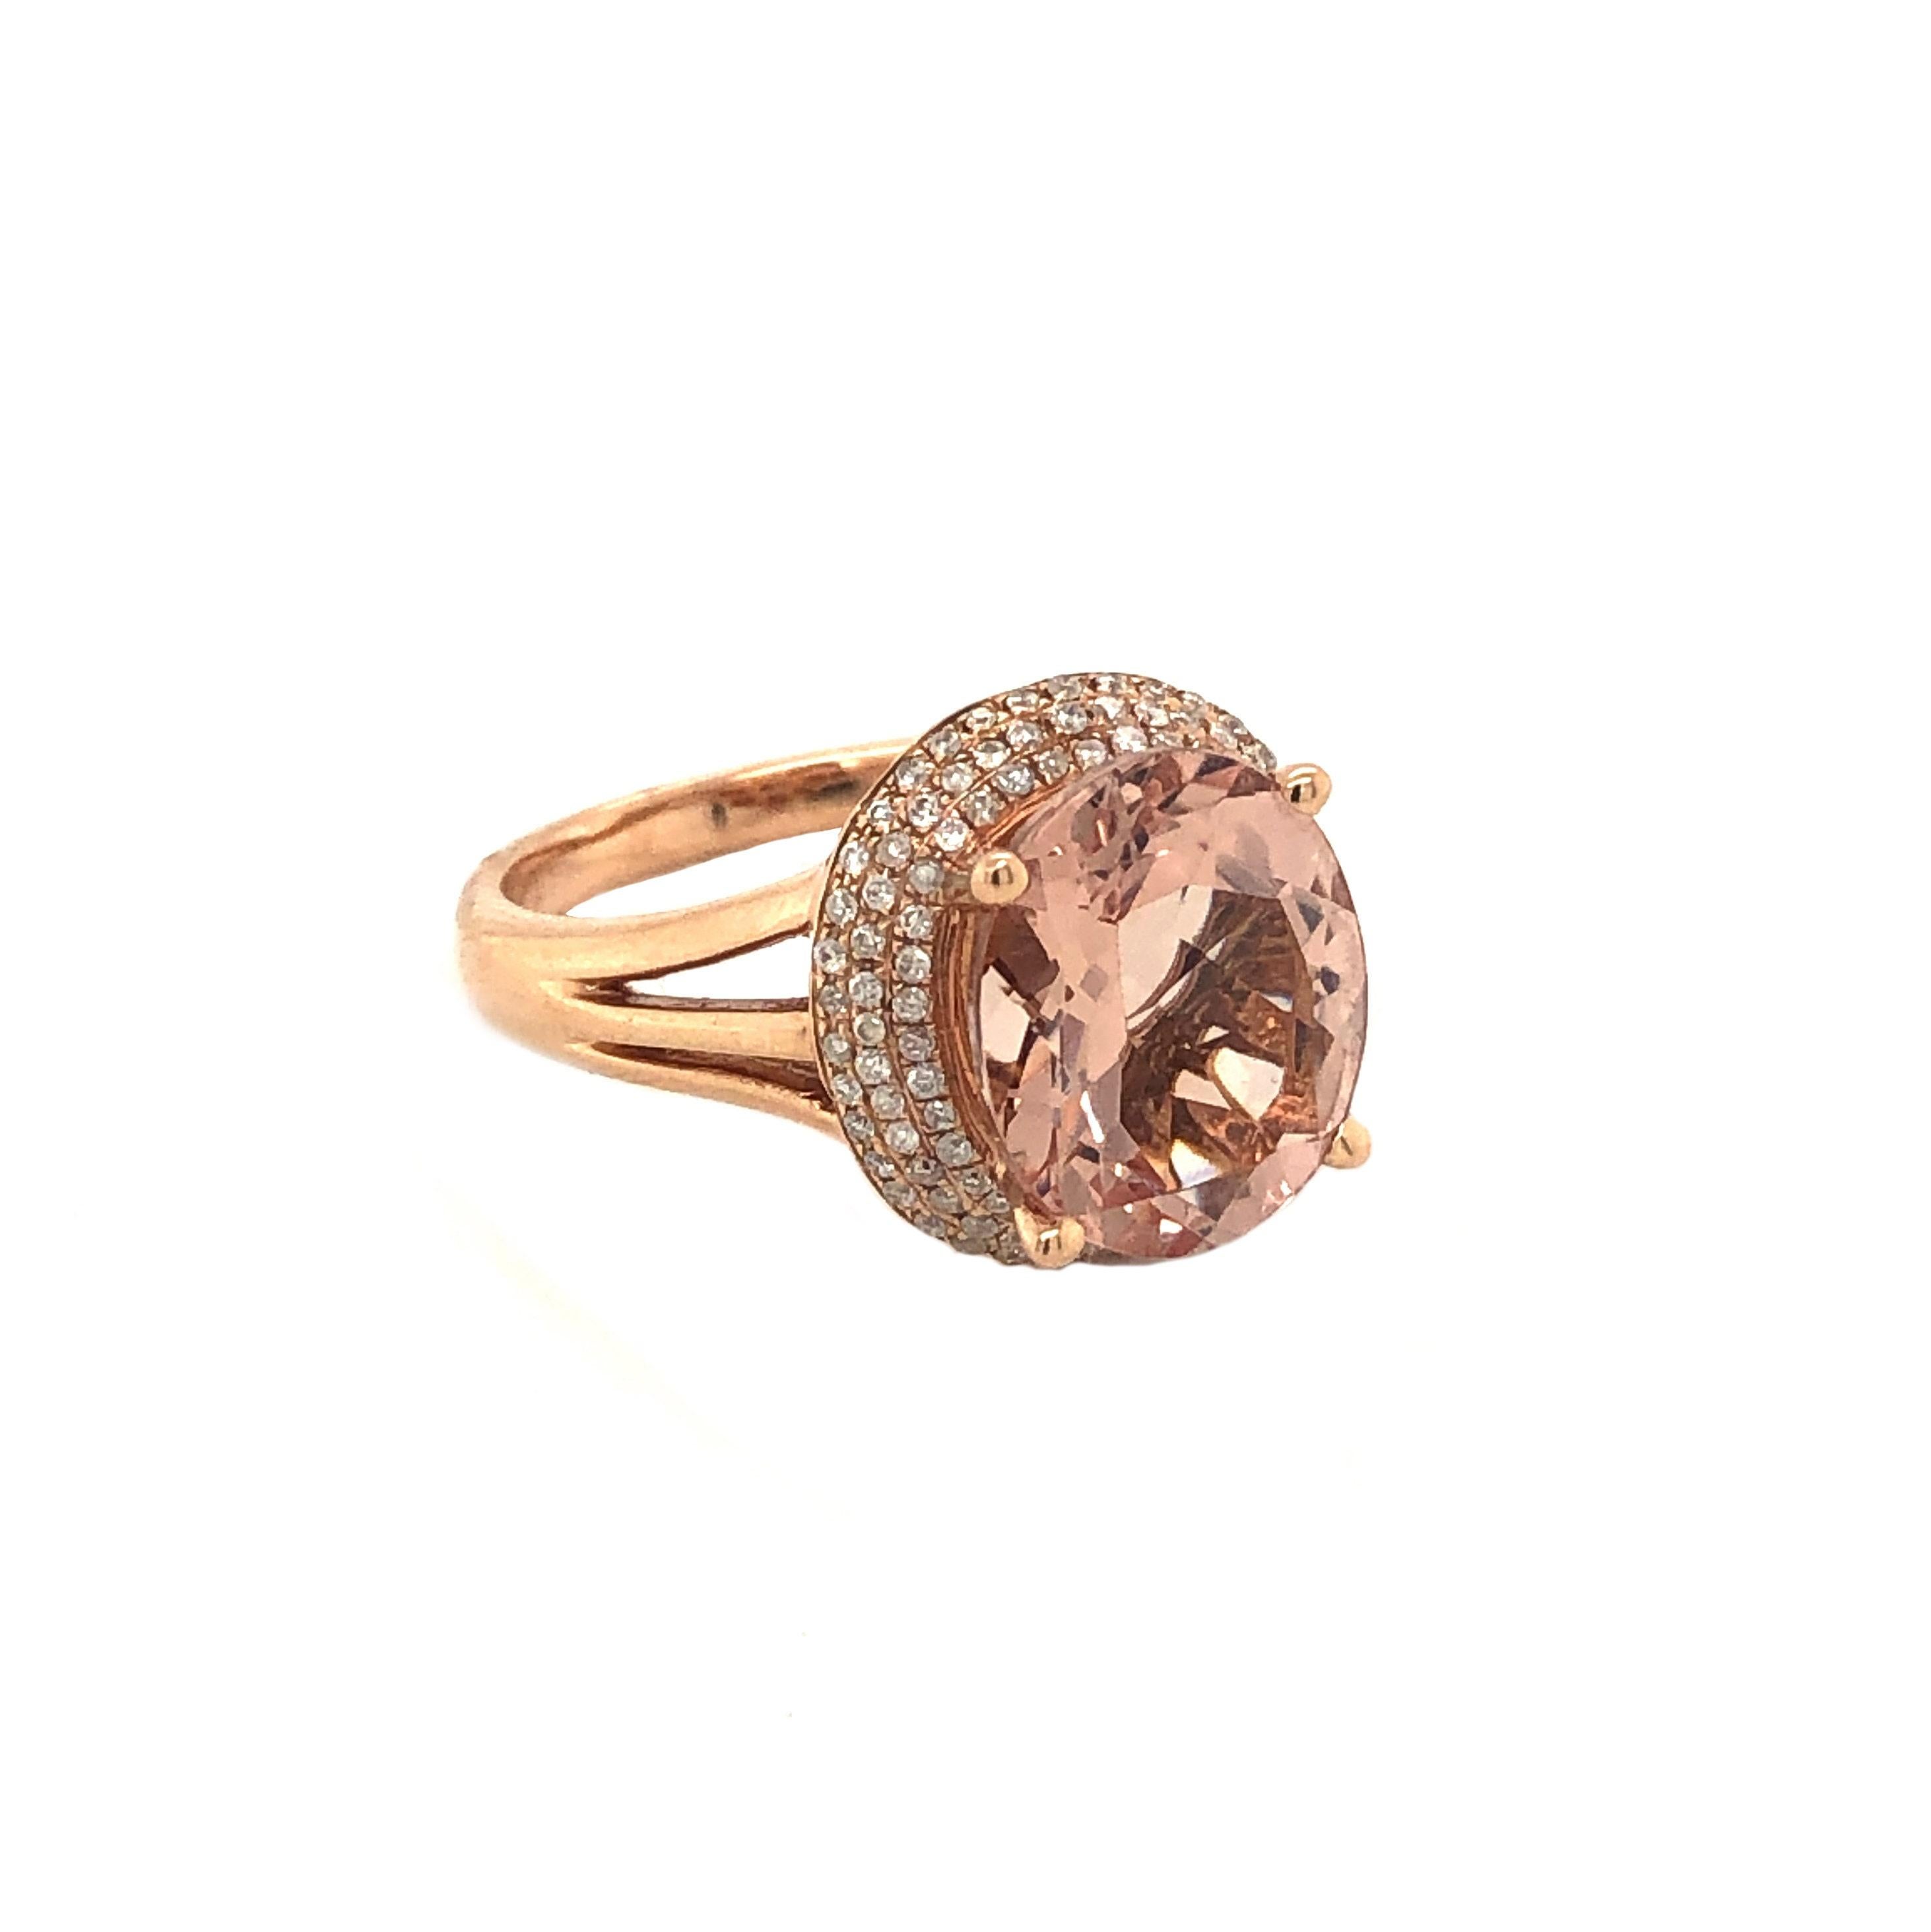 This is an alluring natural morganite and diamond ring set in solid 14K rose gold. The natural 2.94 Ct oval cut morganite has an excellent peachy pink color and is surrounded by a triple halo of round cut white diamonds. The ring is stamped 14K and